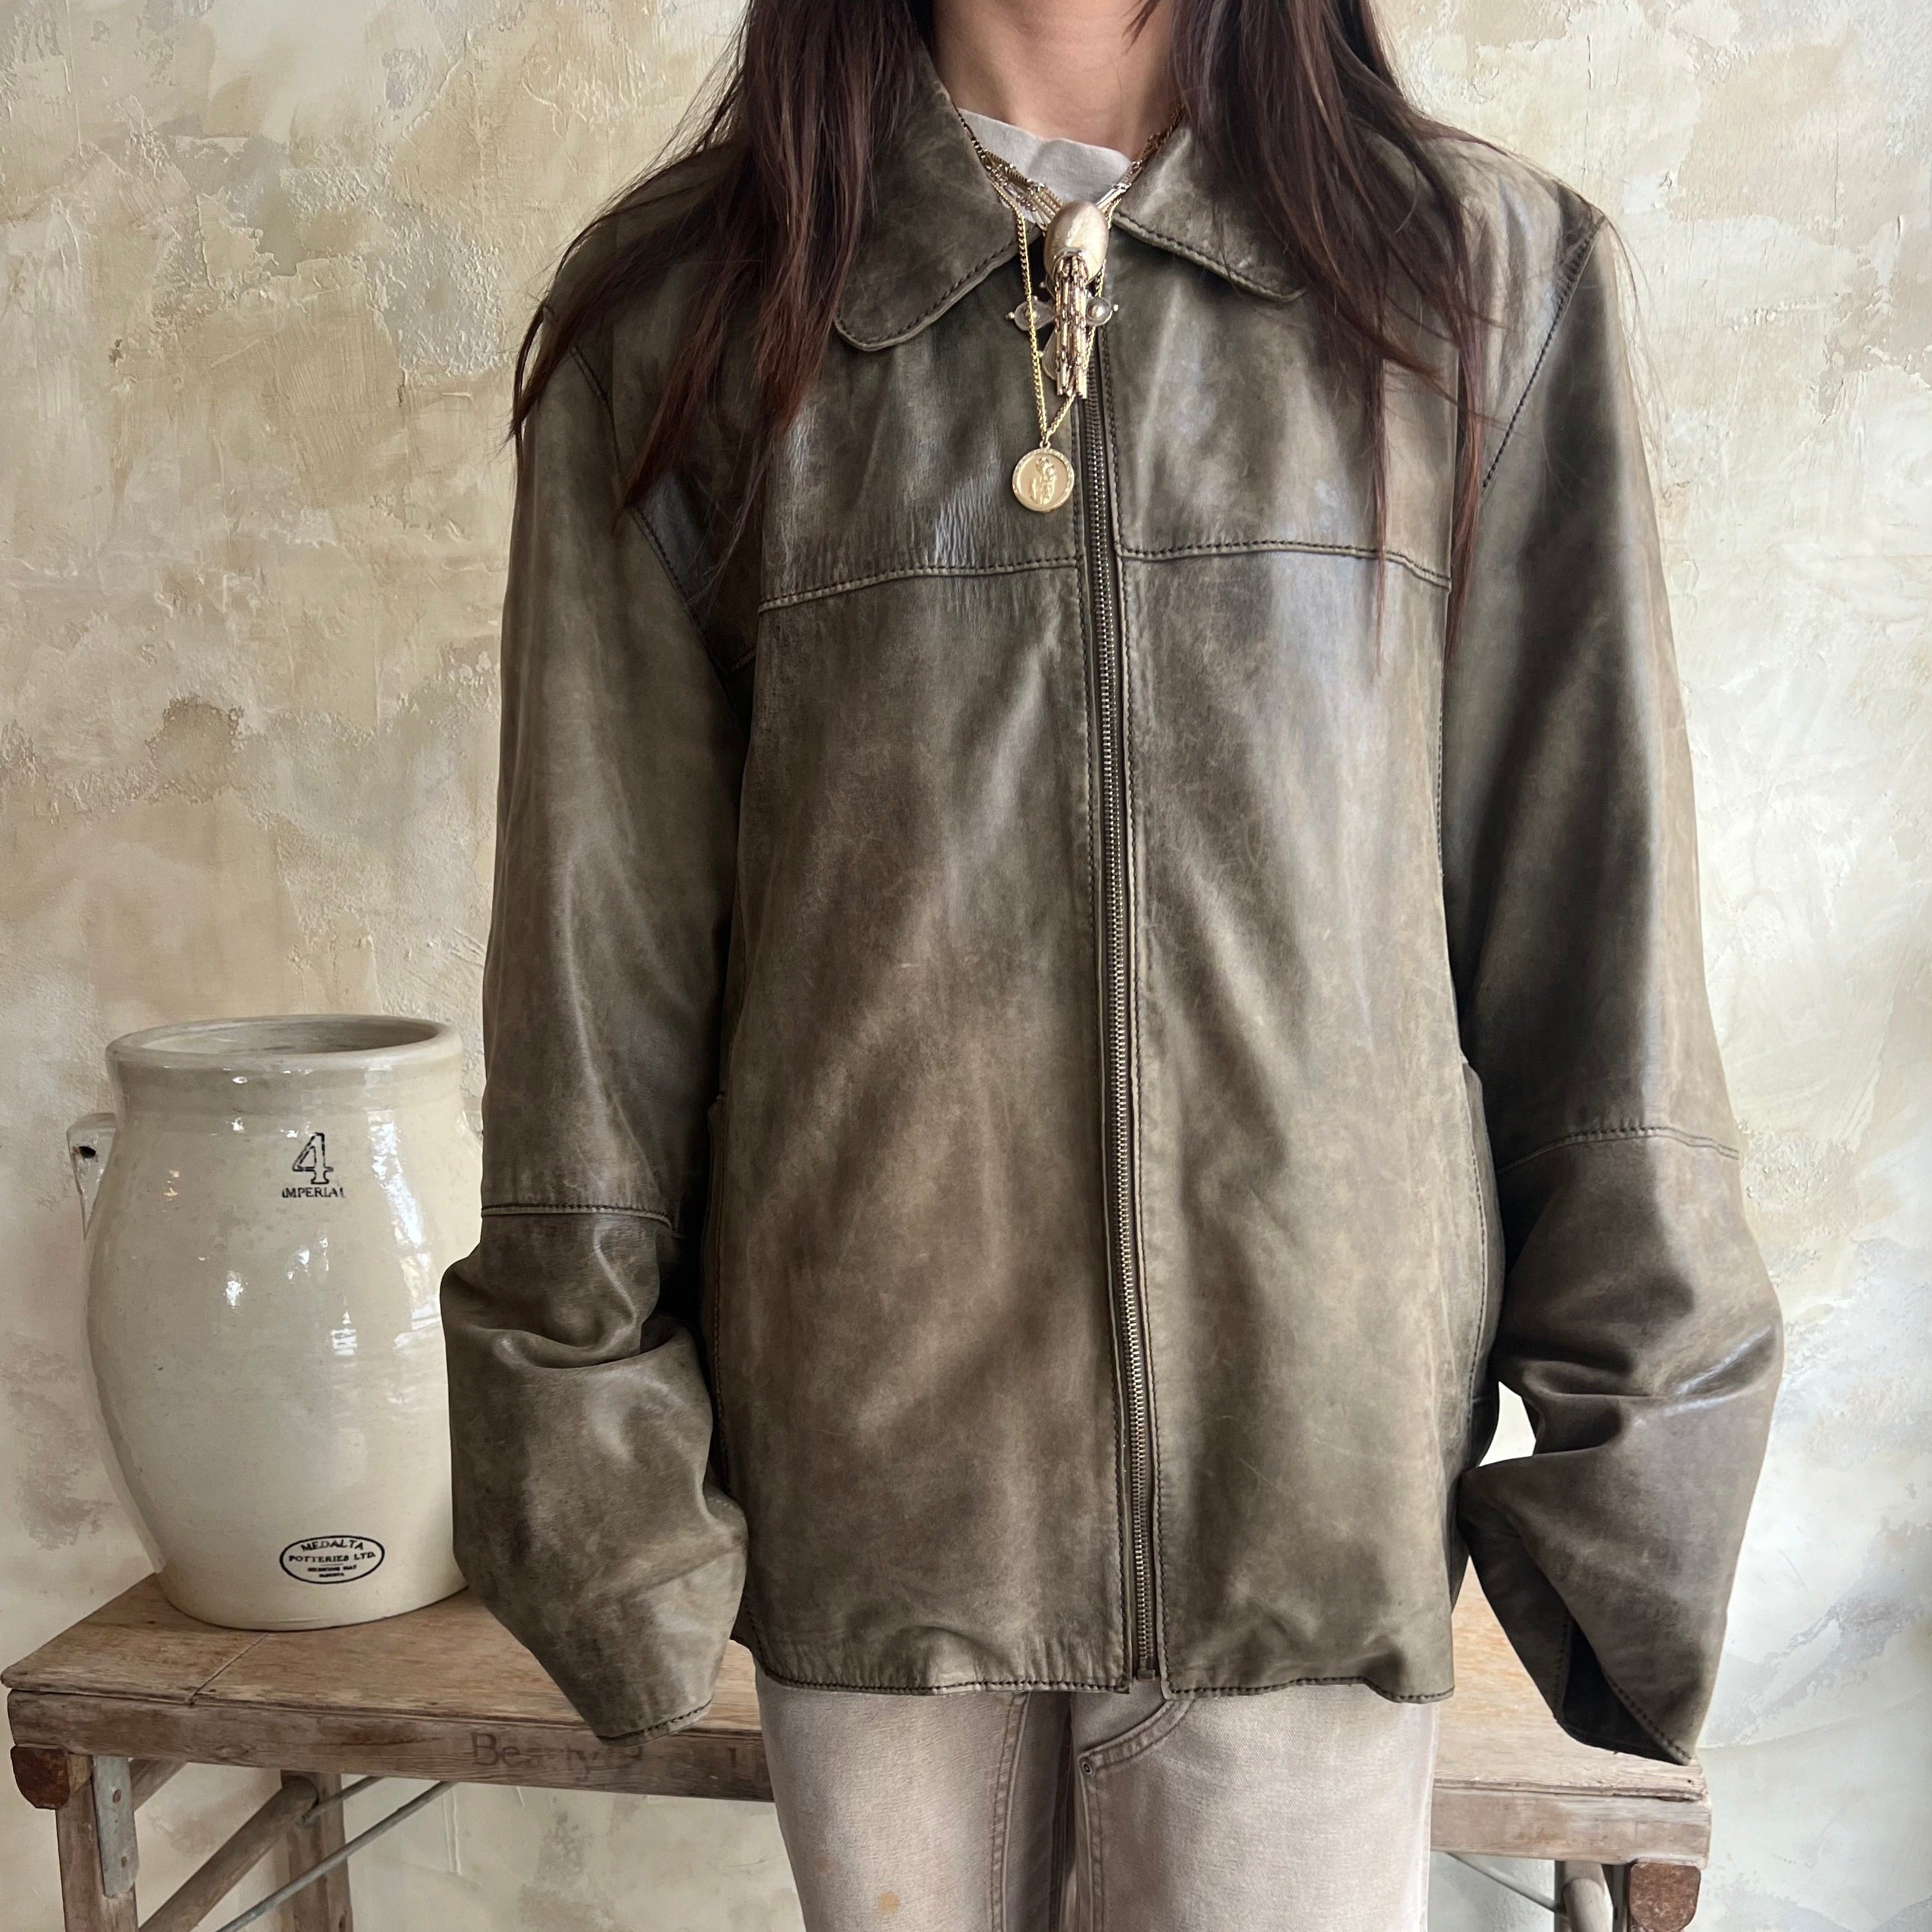 Faded Olive Green  Leather Jacket